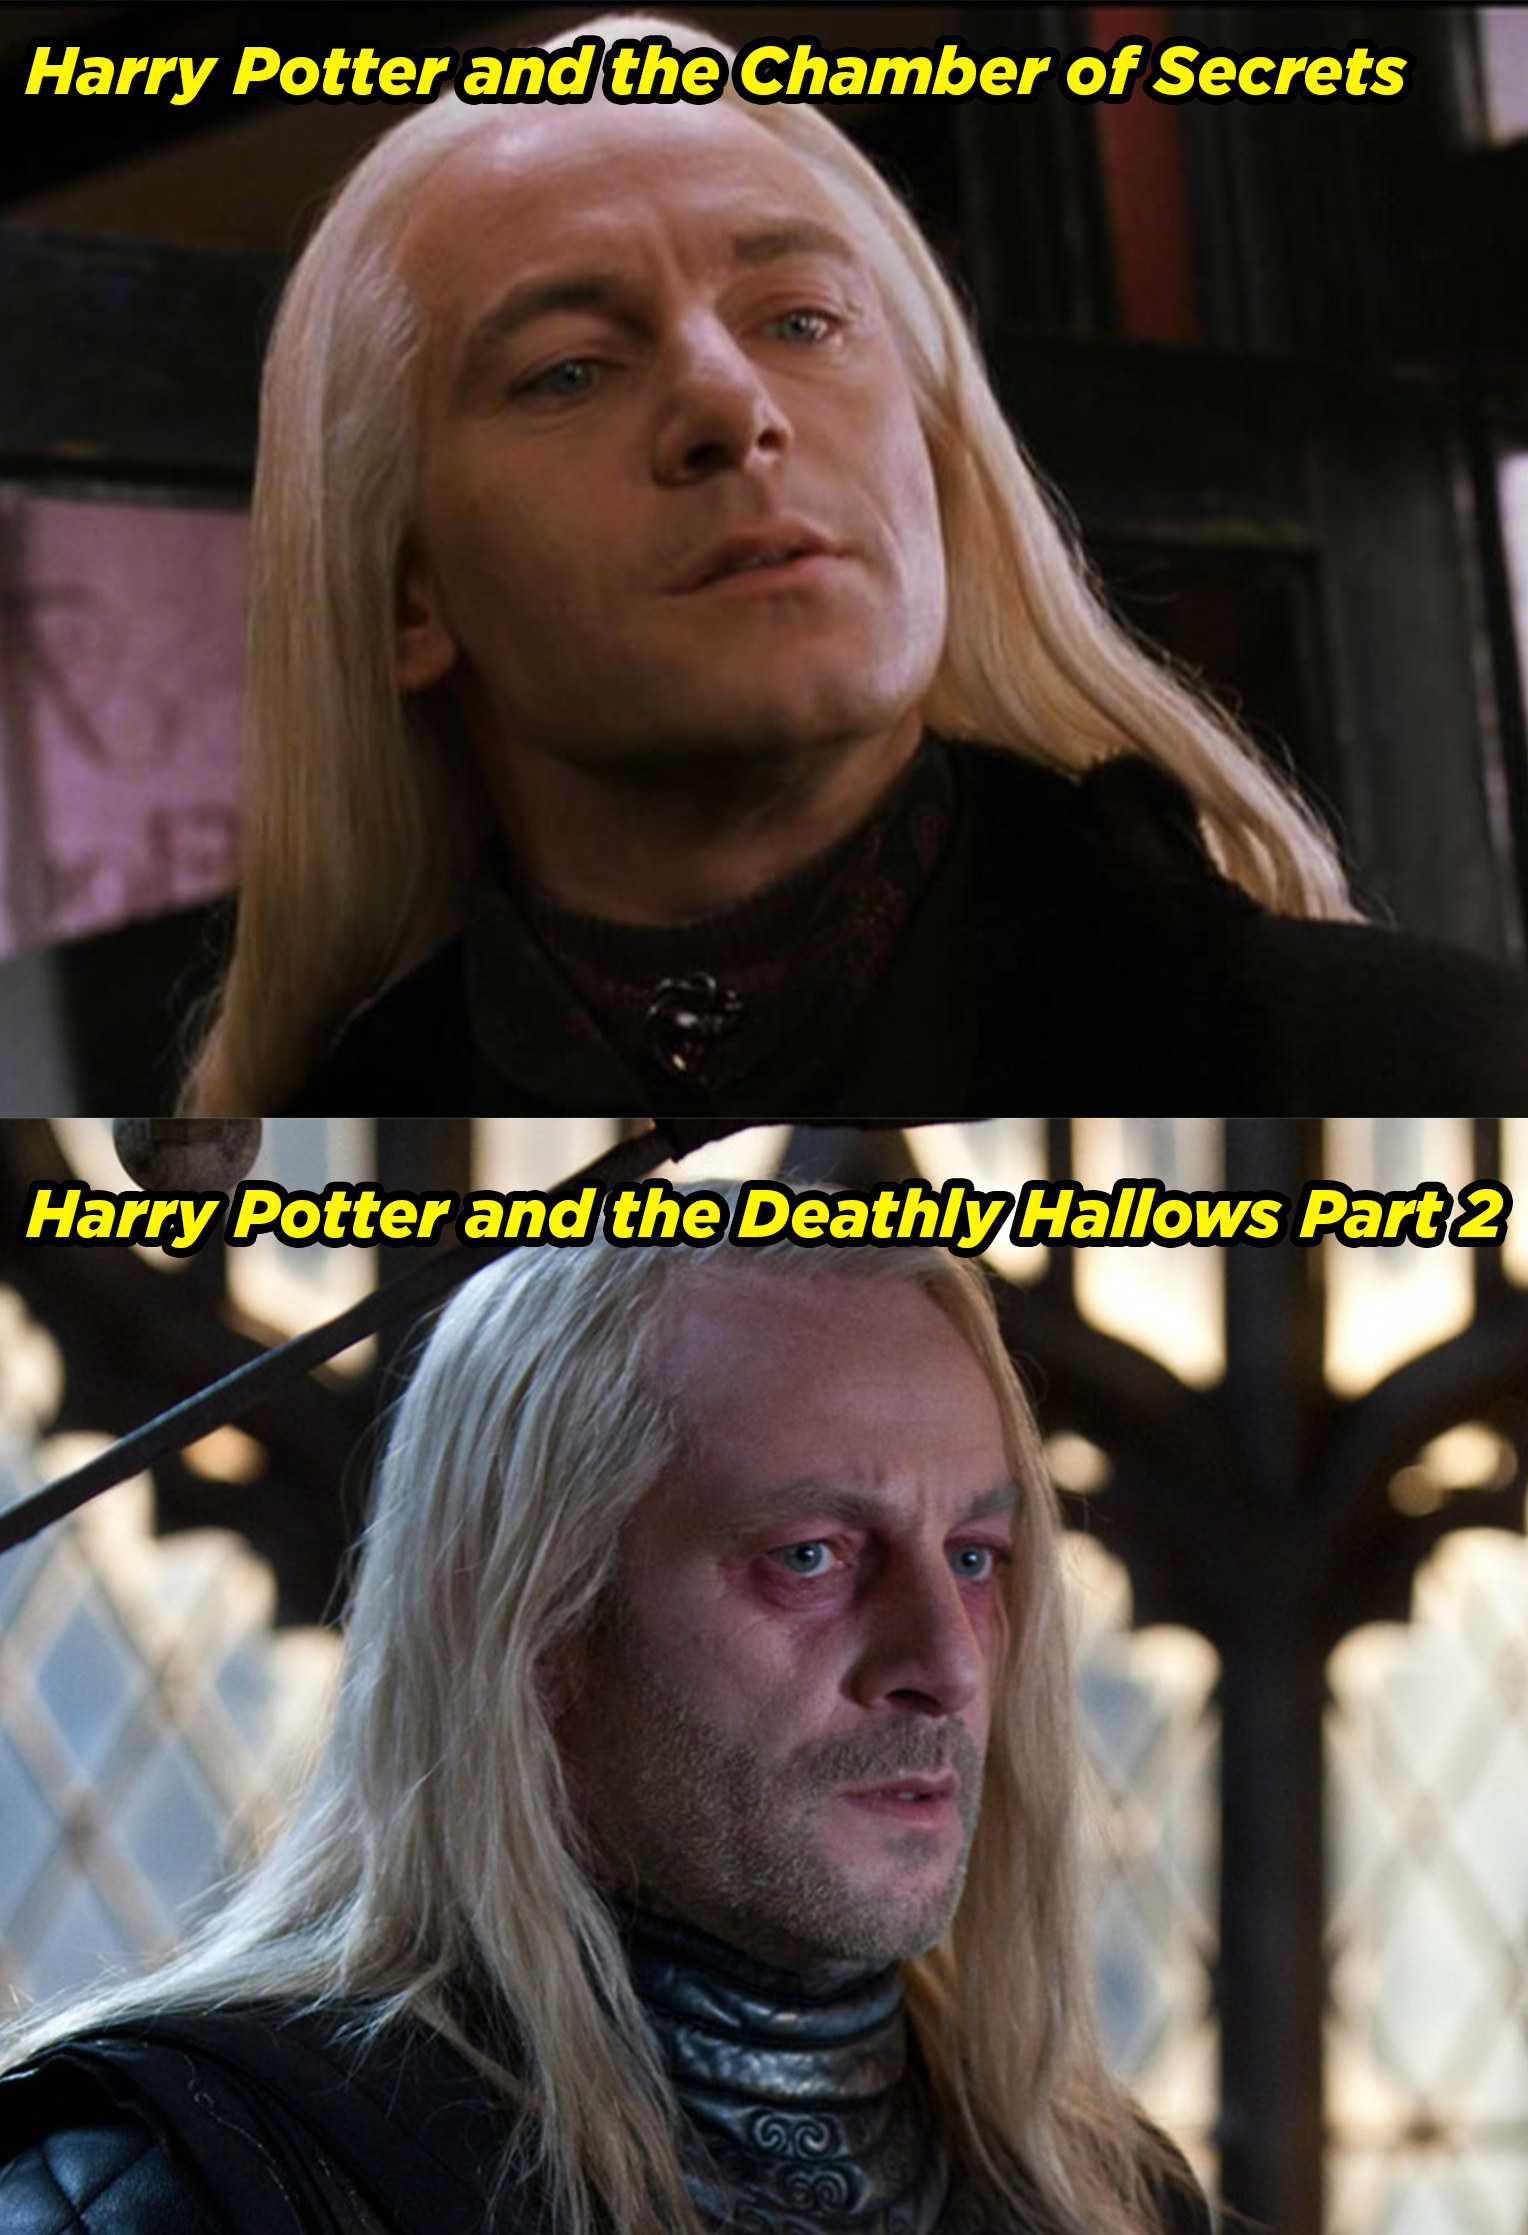 Jason Isaacs in Chamber of Secrets and Deathly Hallows Part 2